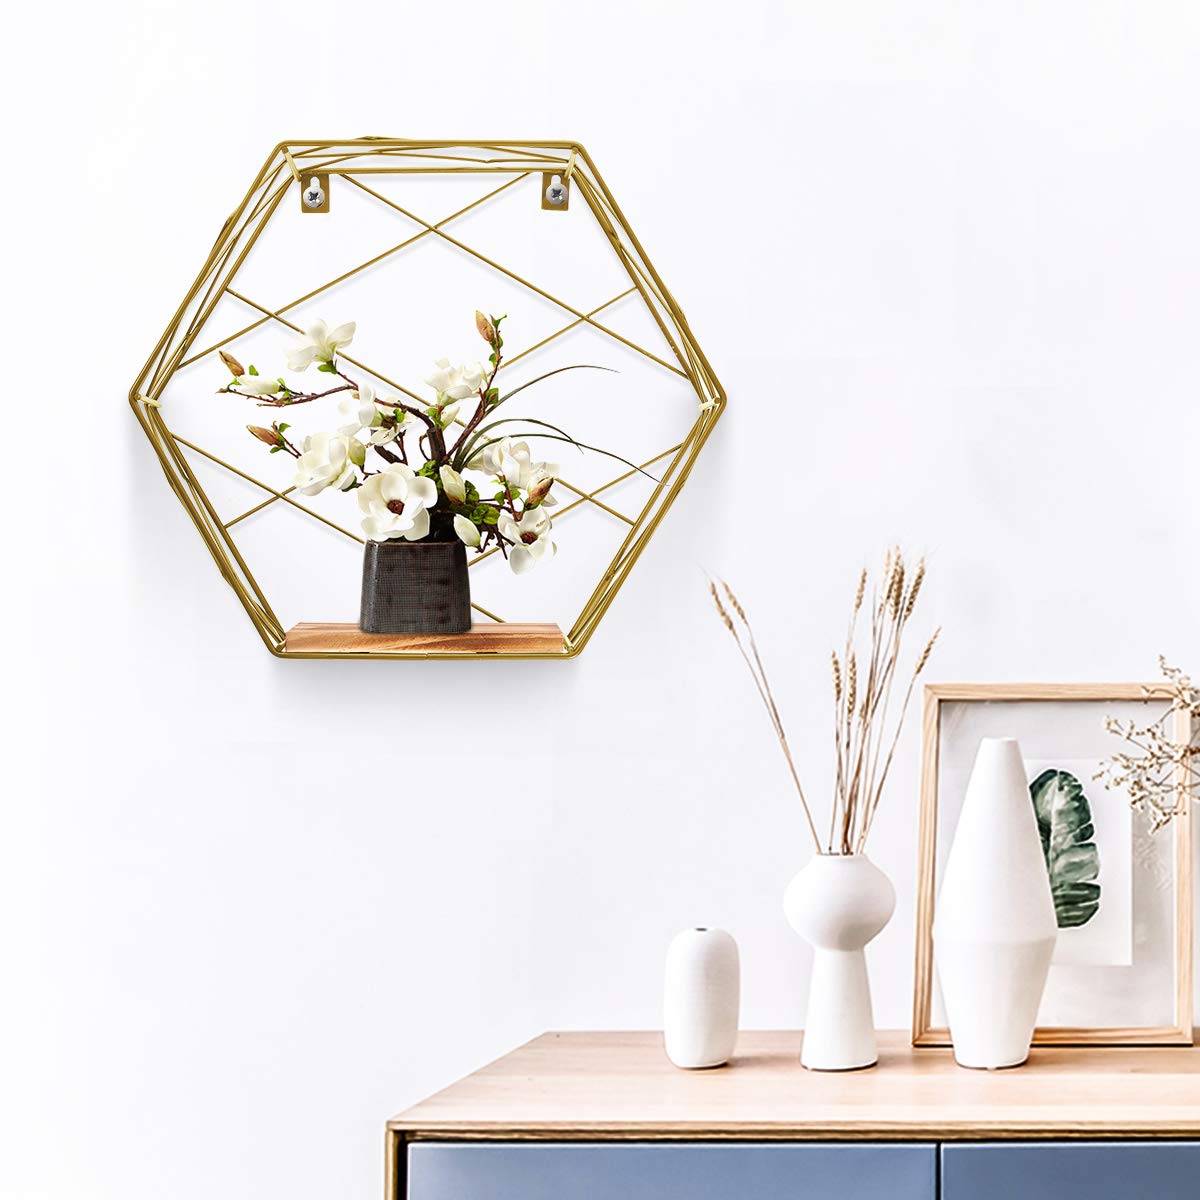 3Pcsset-Hexagonal-Wall-Mounted-Shelves-Floating-Wall-Storage-Rack-Holder-Organizer-Display-Stand-Hom-1792546-6